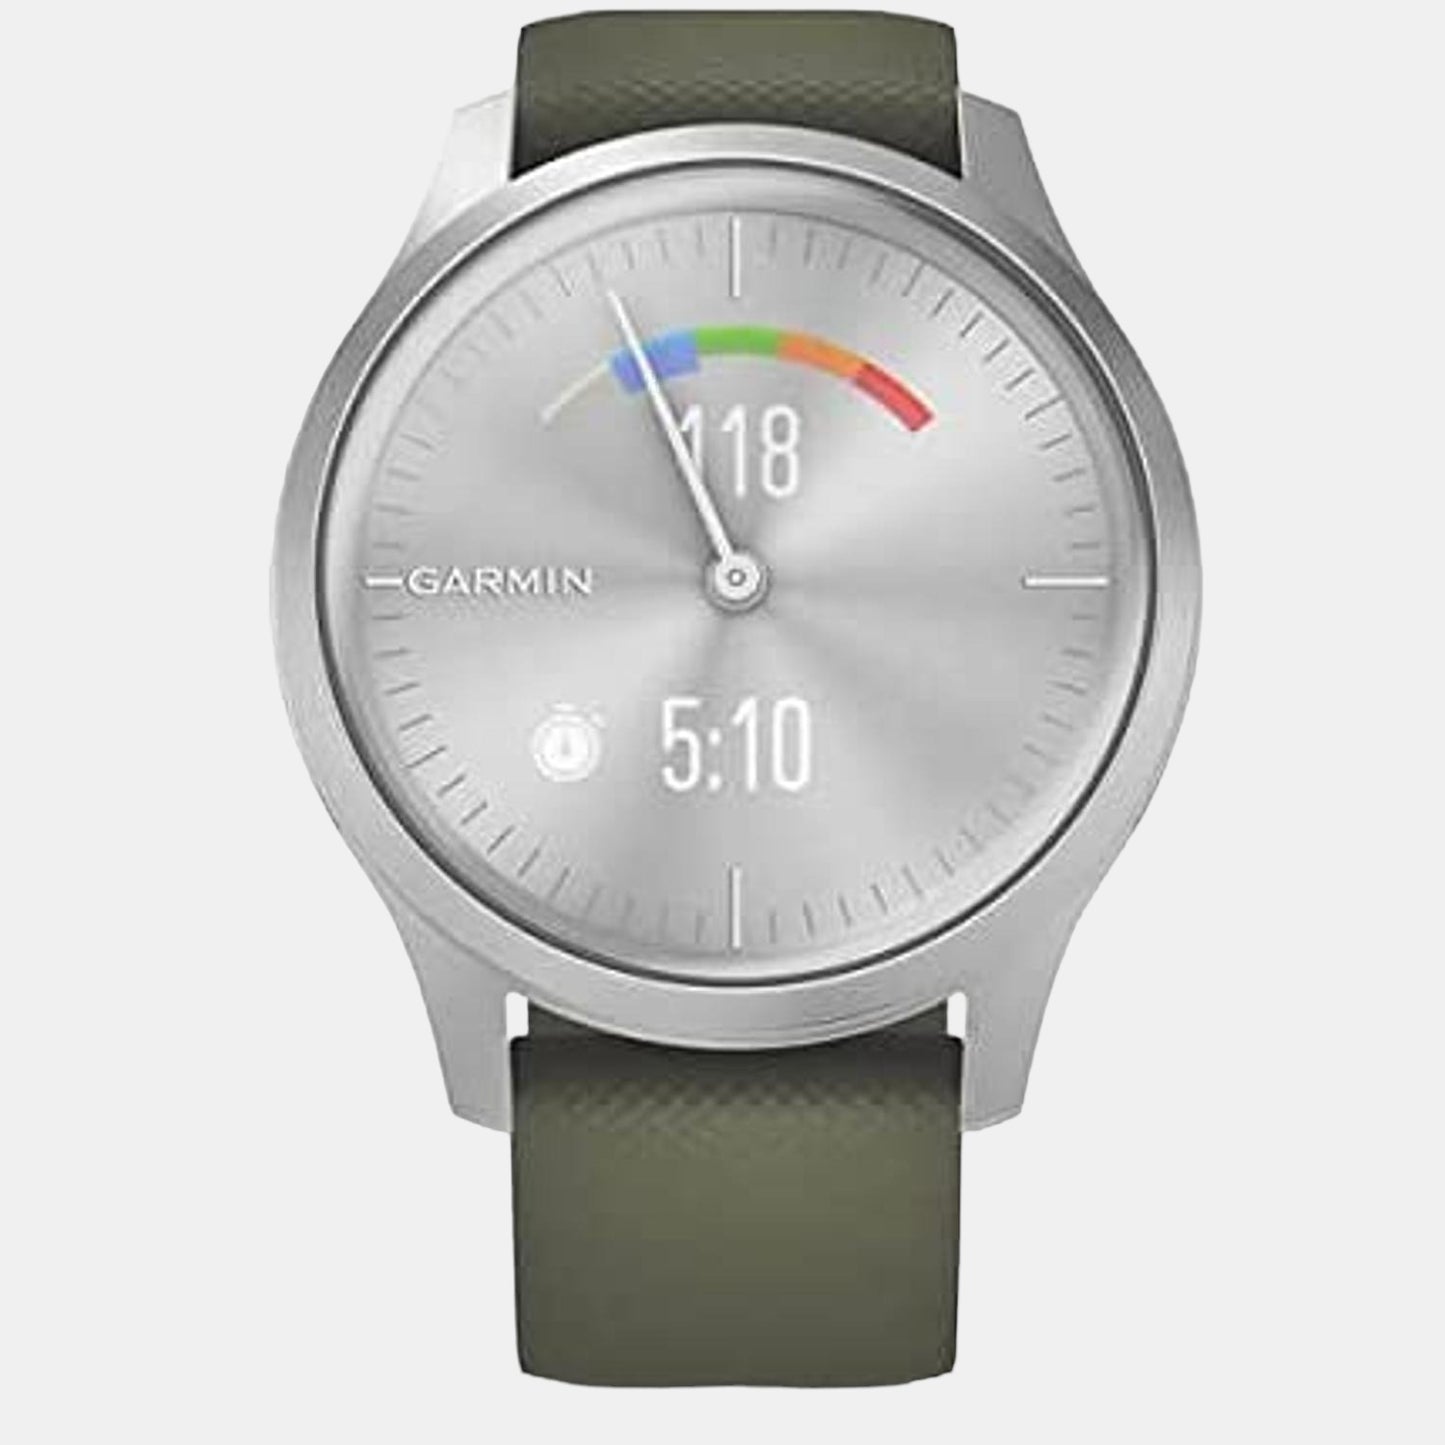 garmin-fiber-reinforced-polymer-silver-with-moss-green-band-amoled-male-watch-vivomove-style-silver-moss-silicone